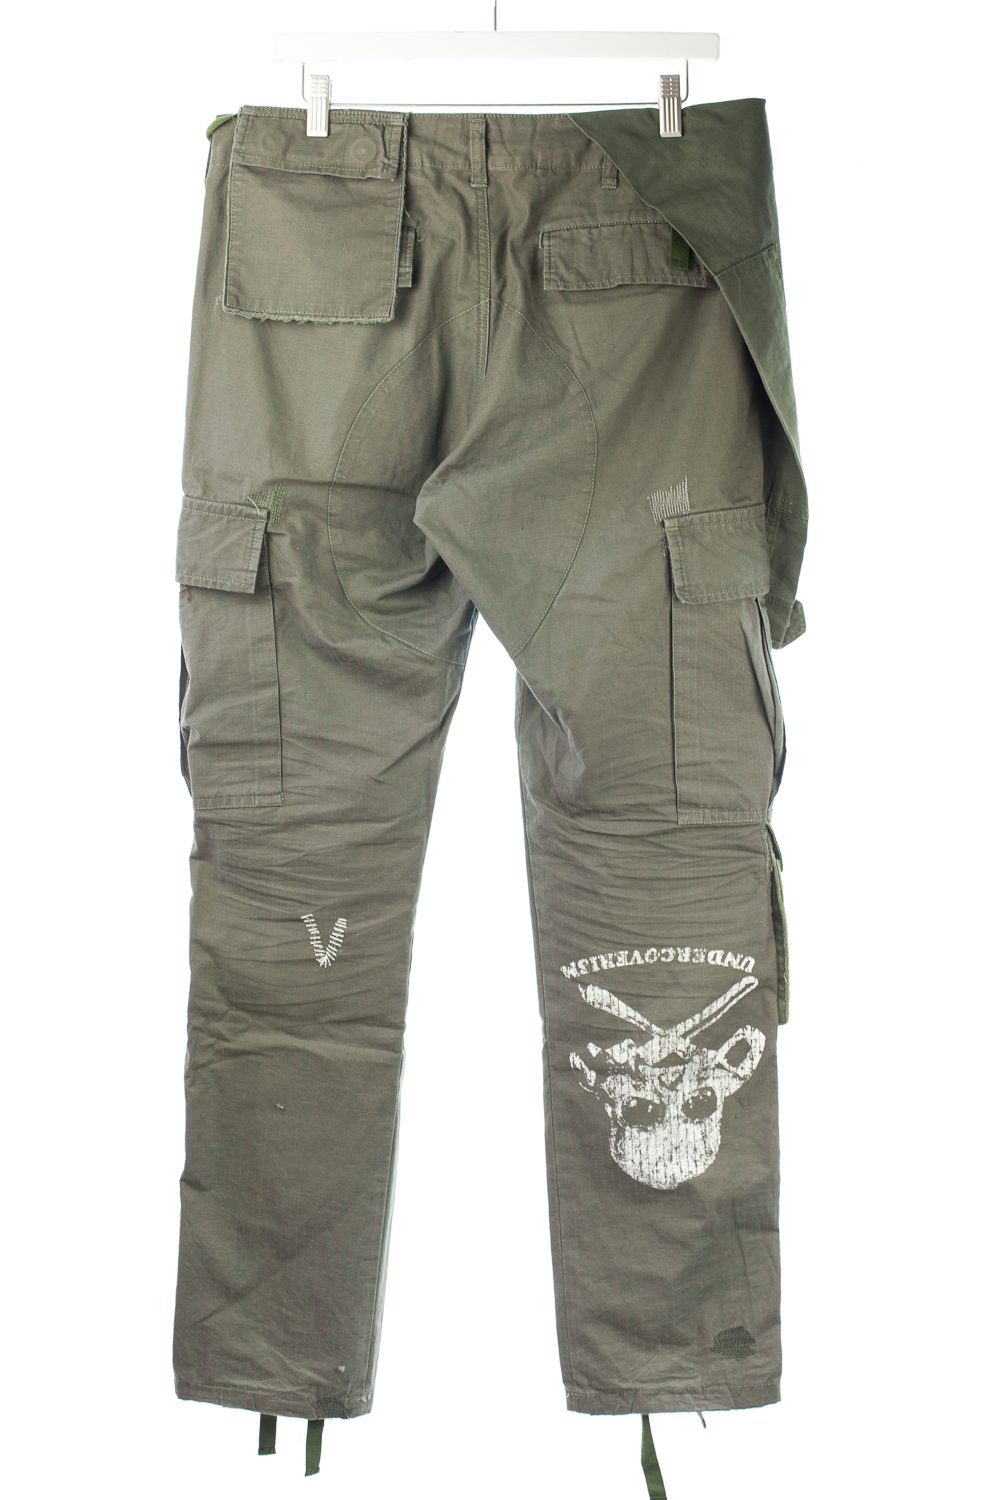 FW03 “Paper Doll” Reconstructed Military Cargo Pants